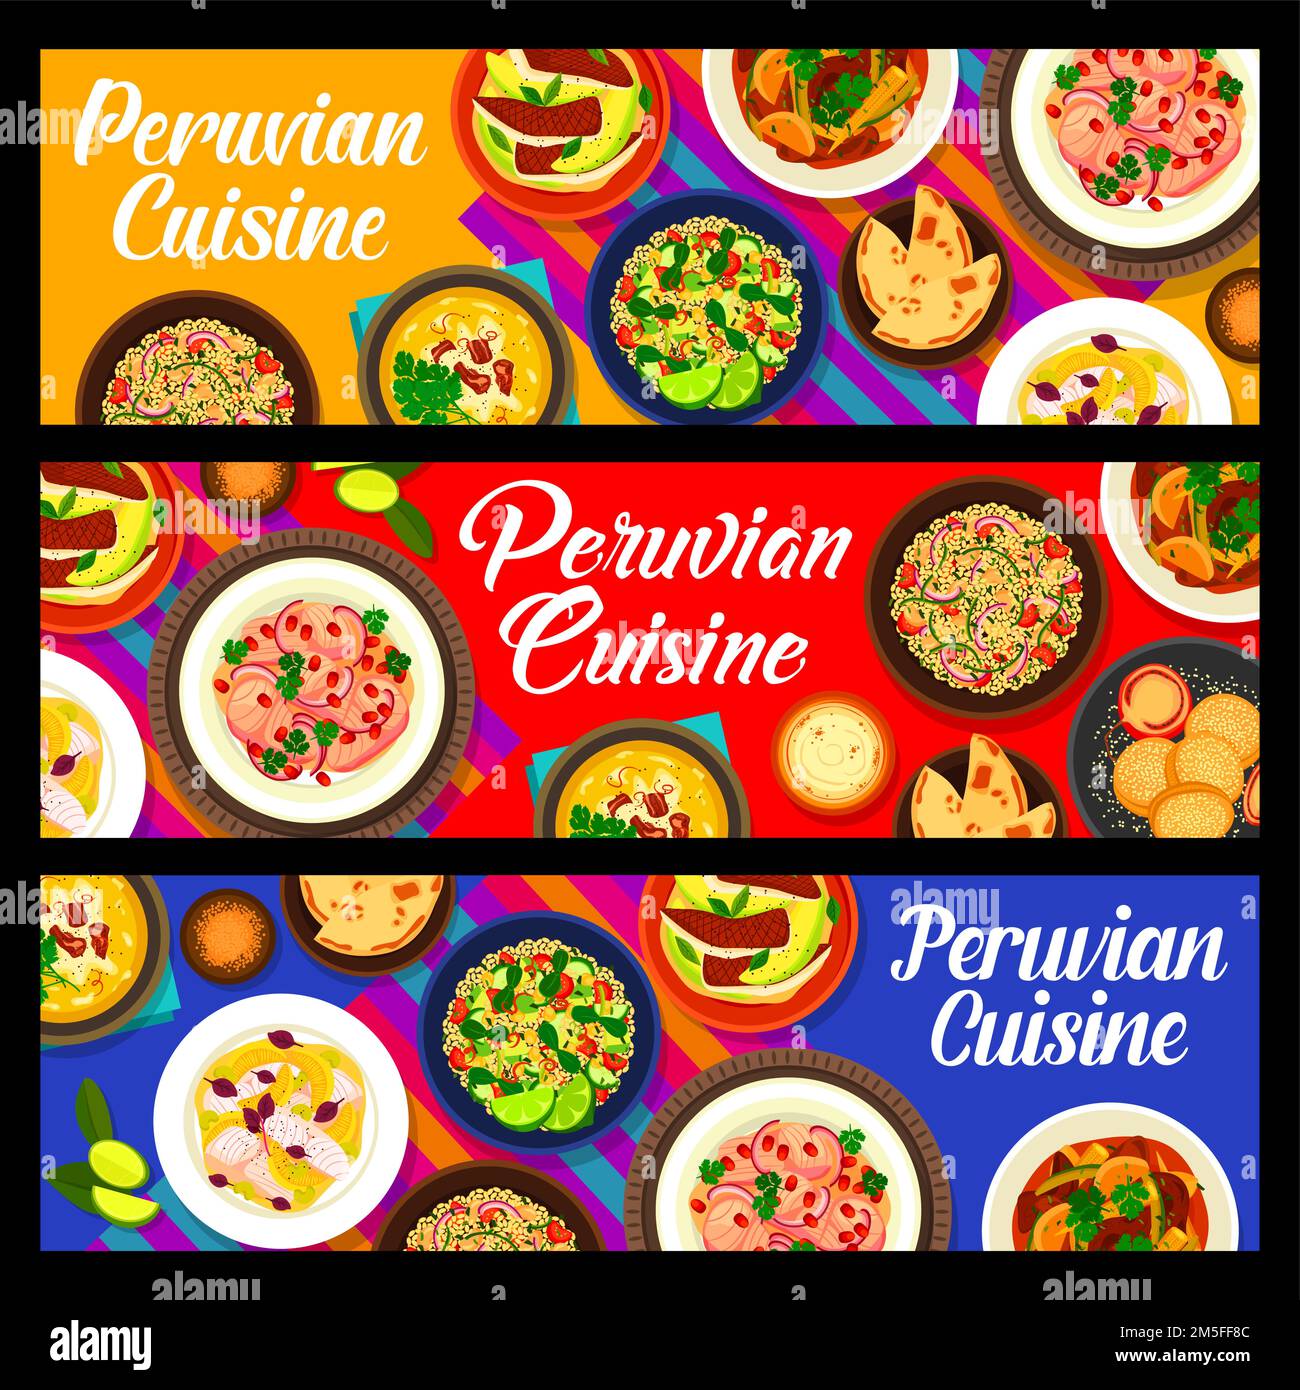 Peruvian cuisine meals vector banners of meat vegetable stew, fish ceviche and quinoa salad. Beef lomo saltado and seafood cebiche with flatbread and dulce de leche sandwich cookie alfajor Stock Vector